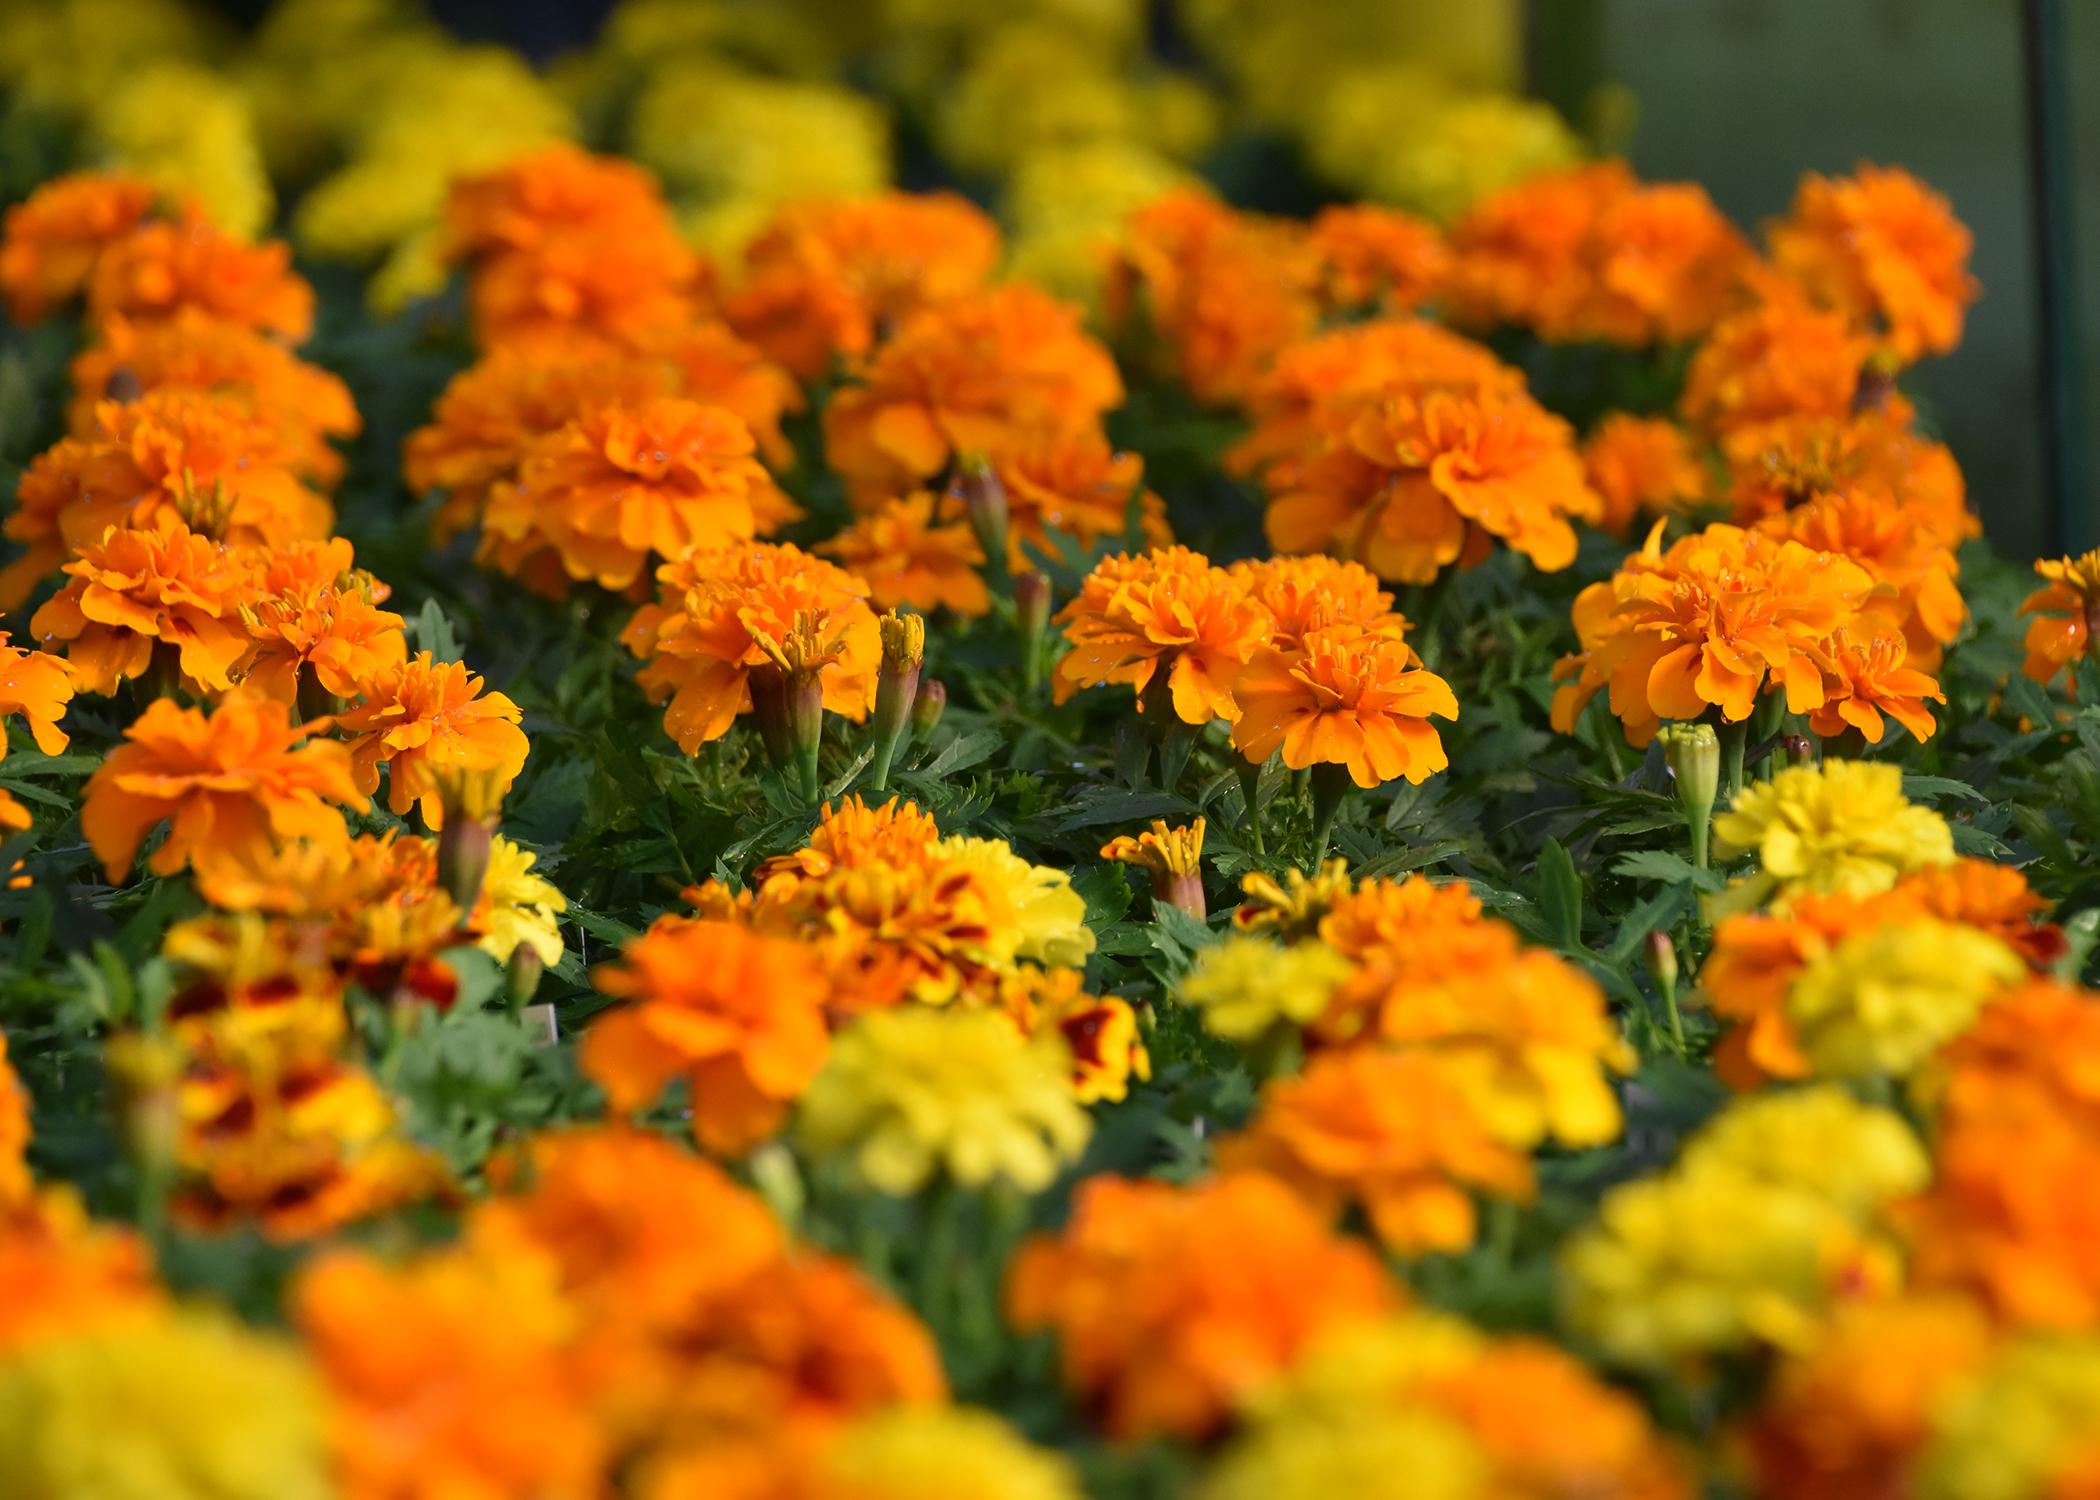 Dozens of yellow and orange blooms form a solid blanket.